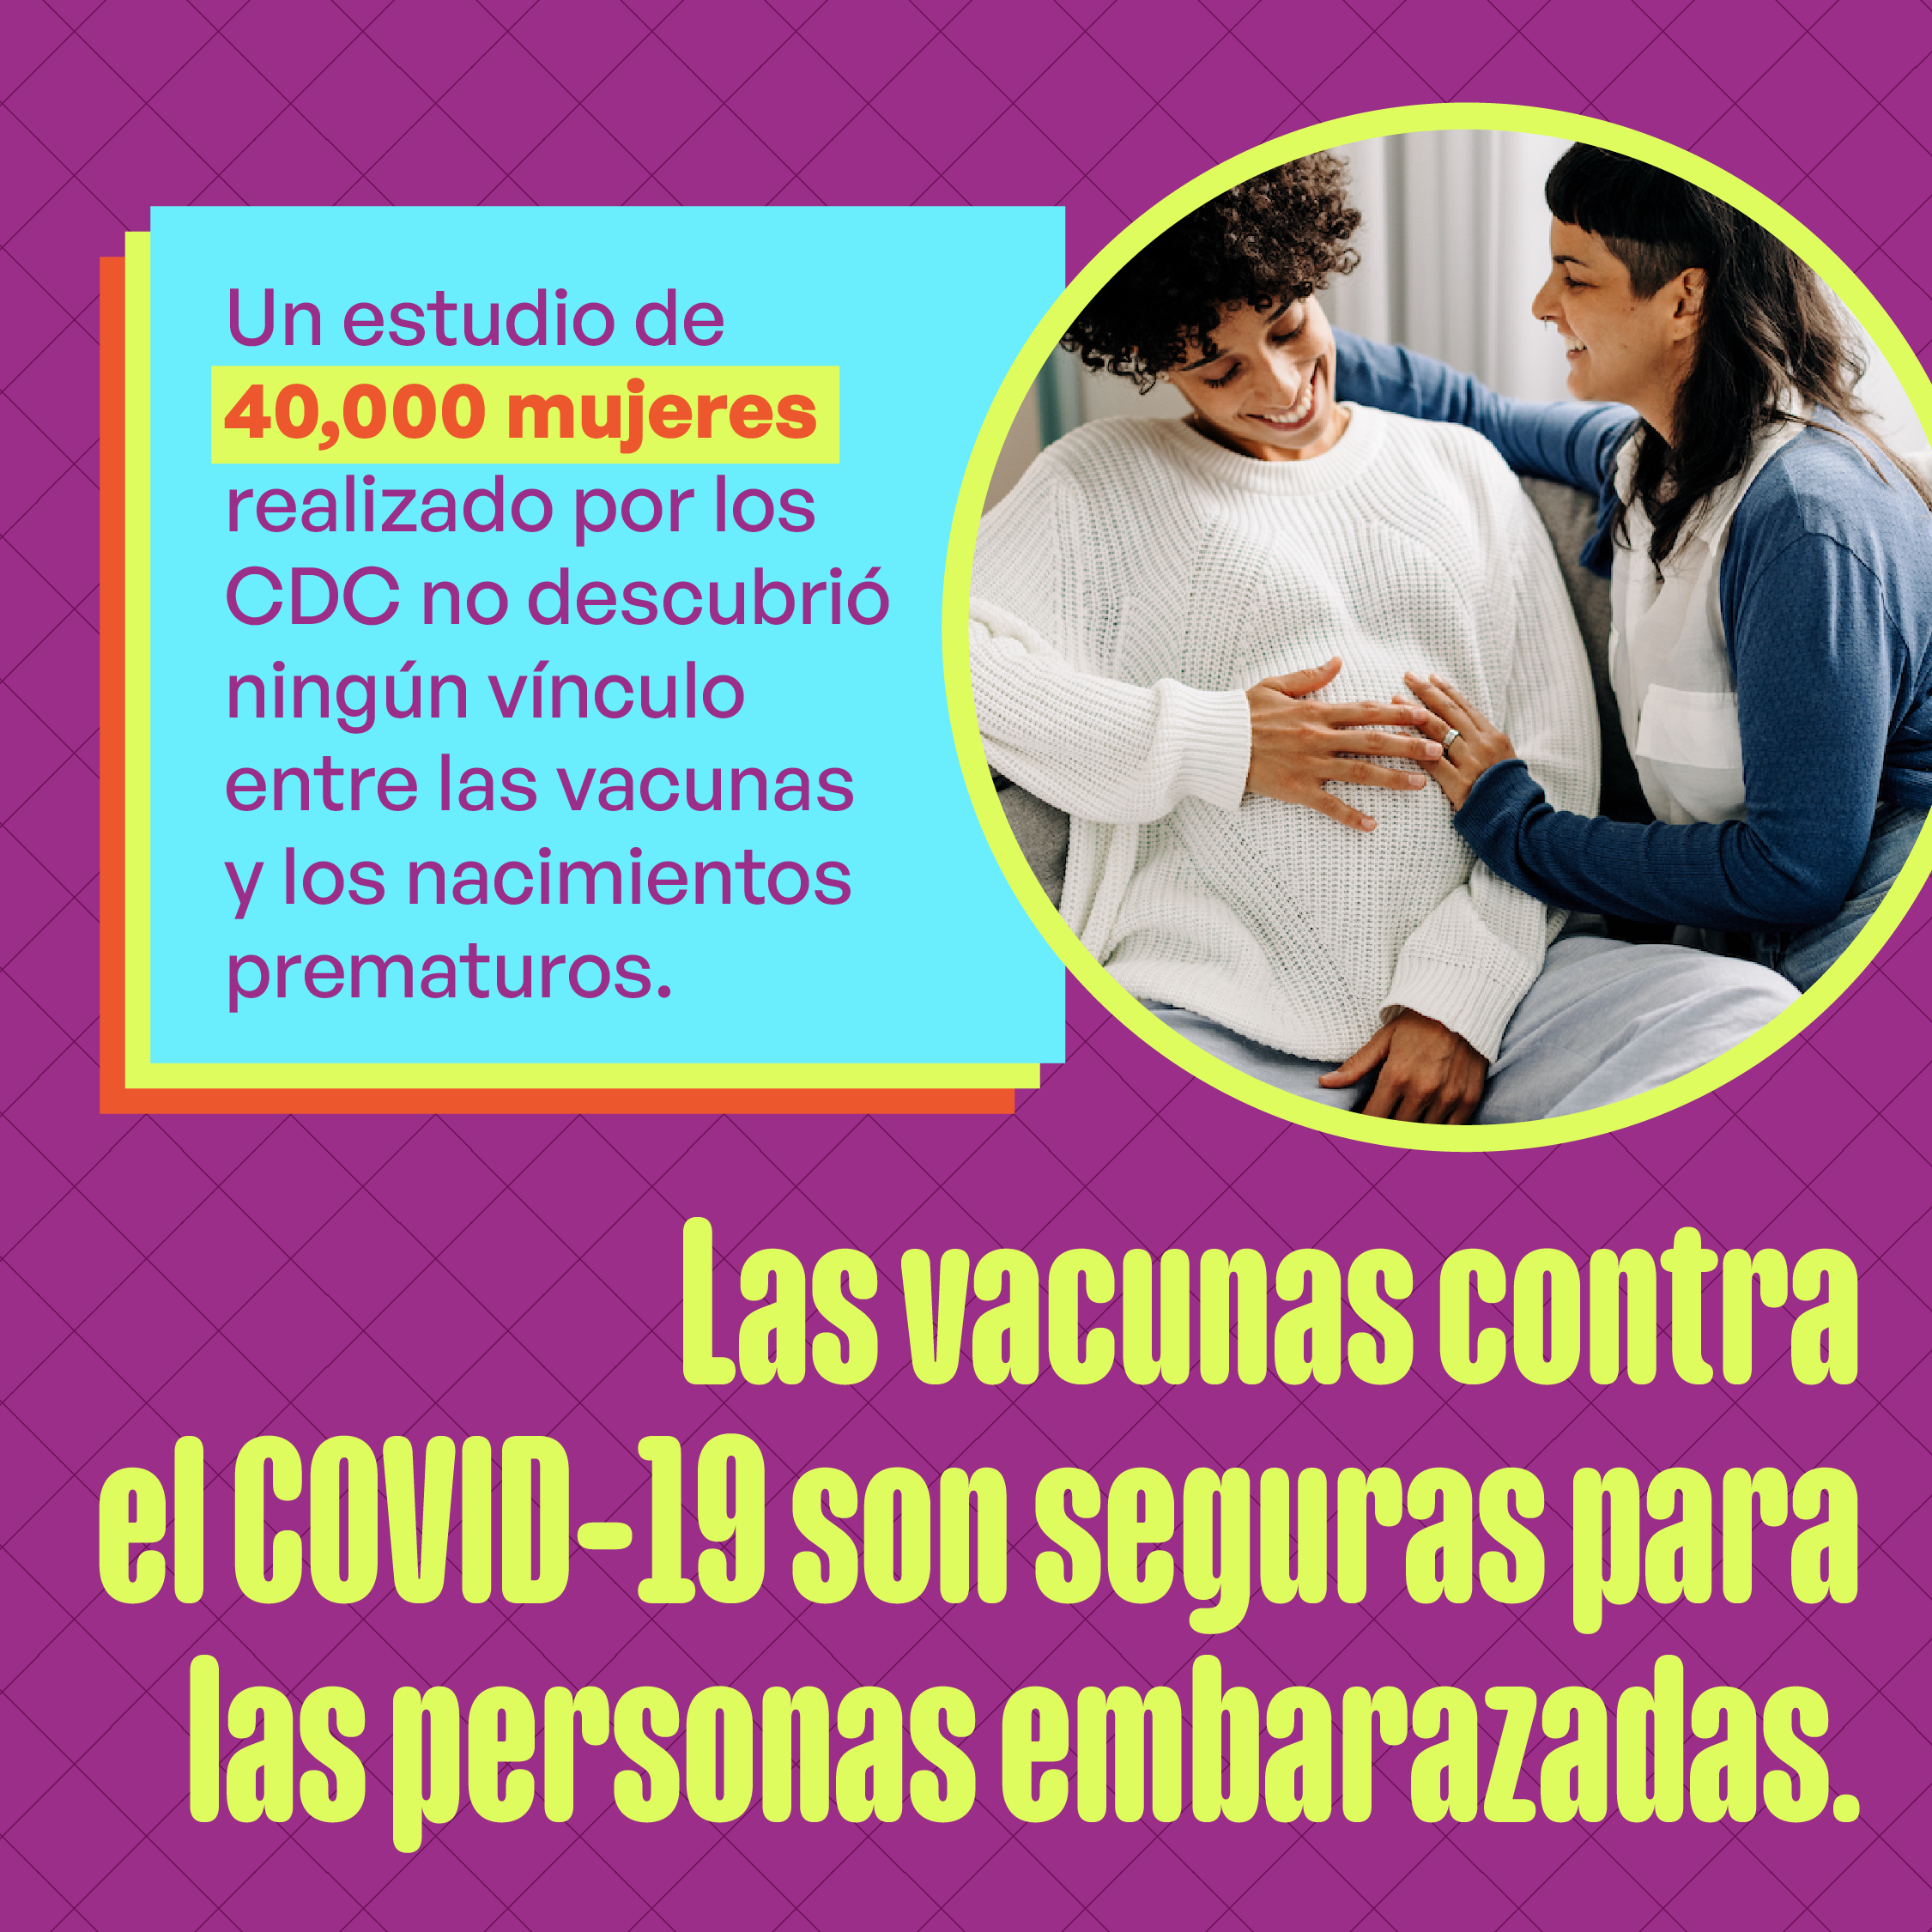 Image of a pregnant person's stomach with their hands cradling it with phrase "A CDC study of 40,000 women found that vaccines had no link to preterm births. COVID-19 vaccines are safe for pregnant people."